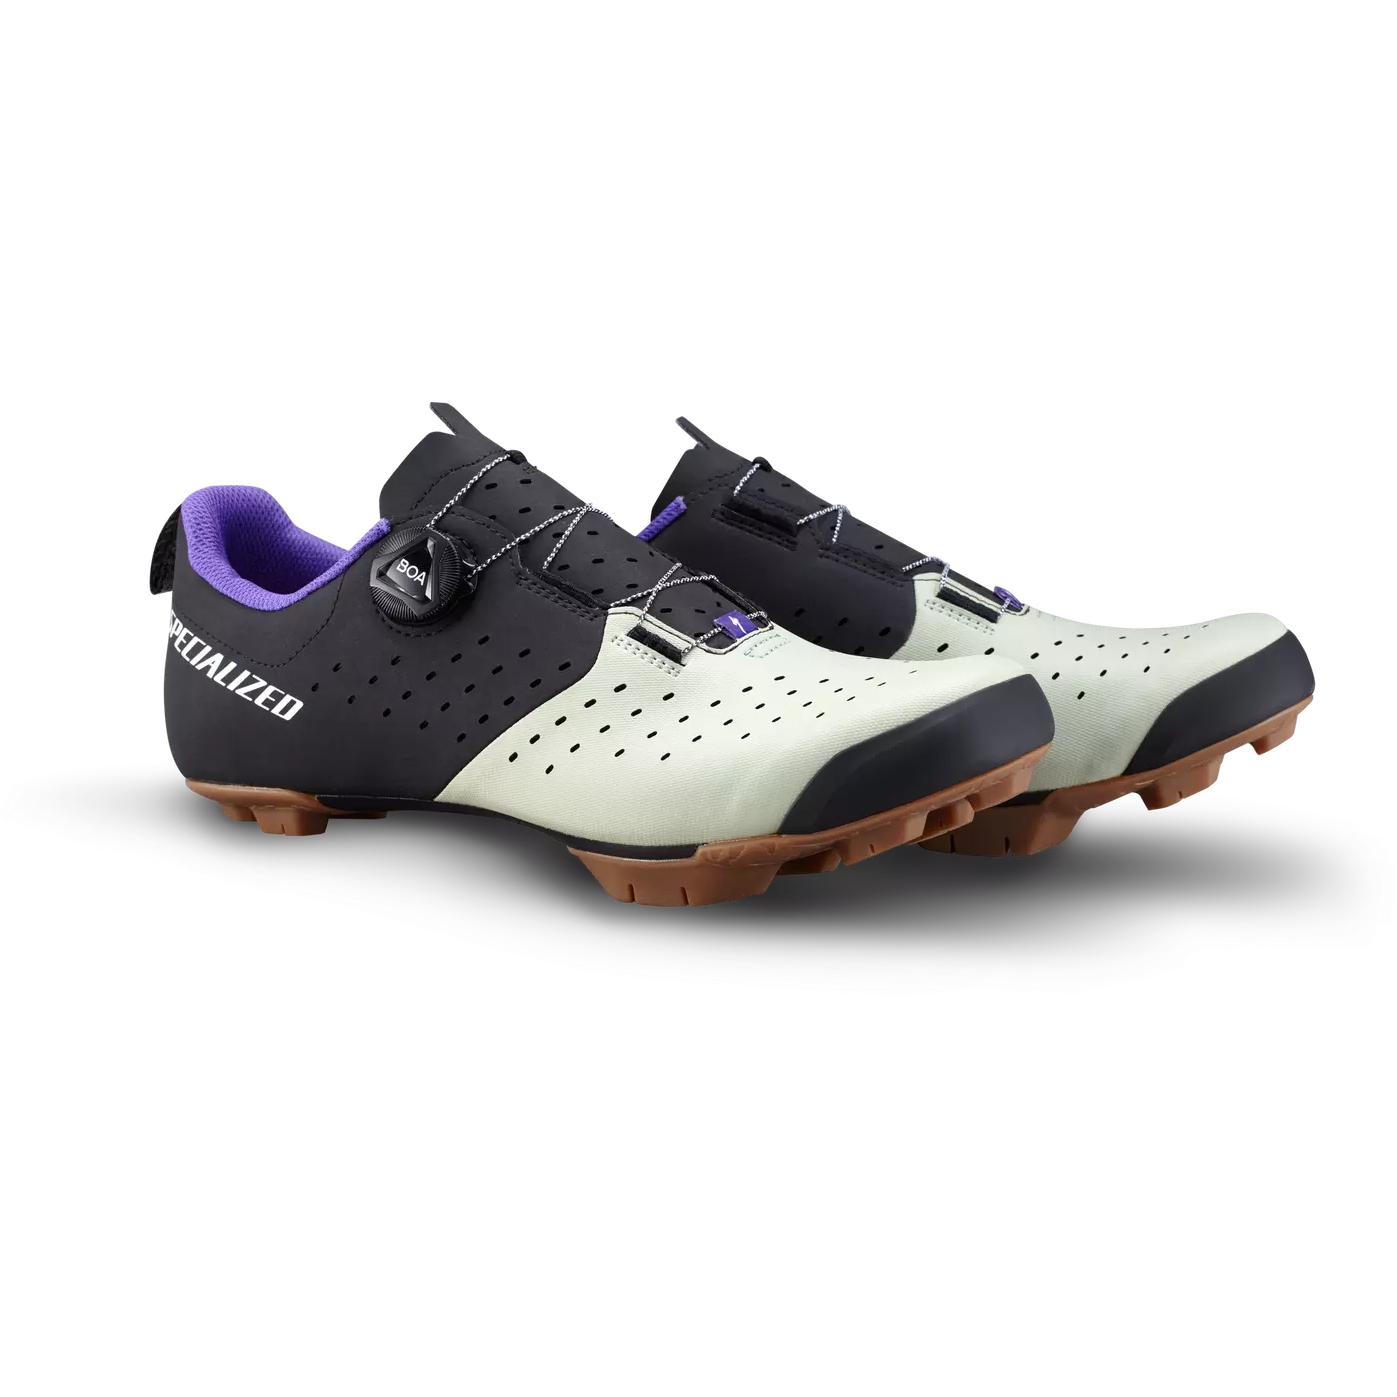 Picture of Specialized Recon 1.0 Gravel Shoes - Spruce